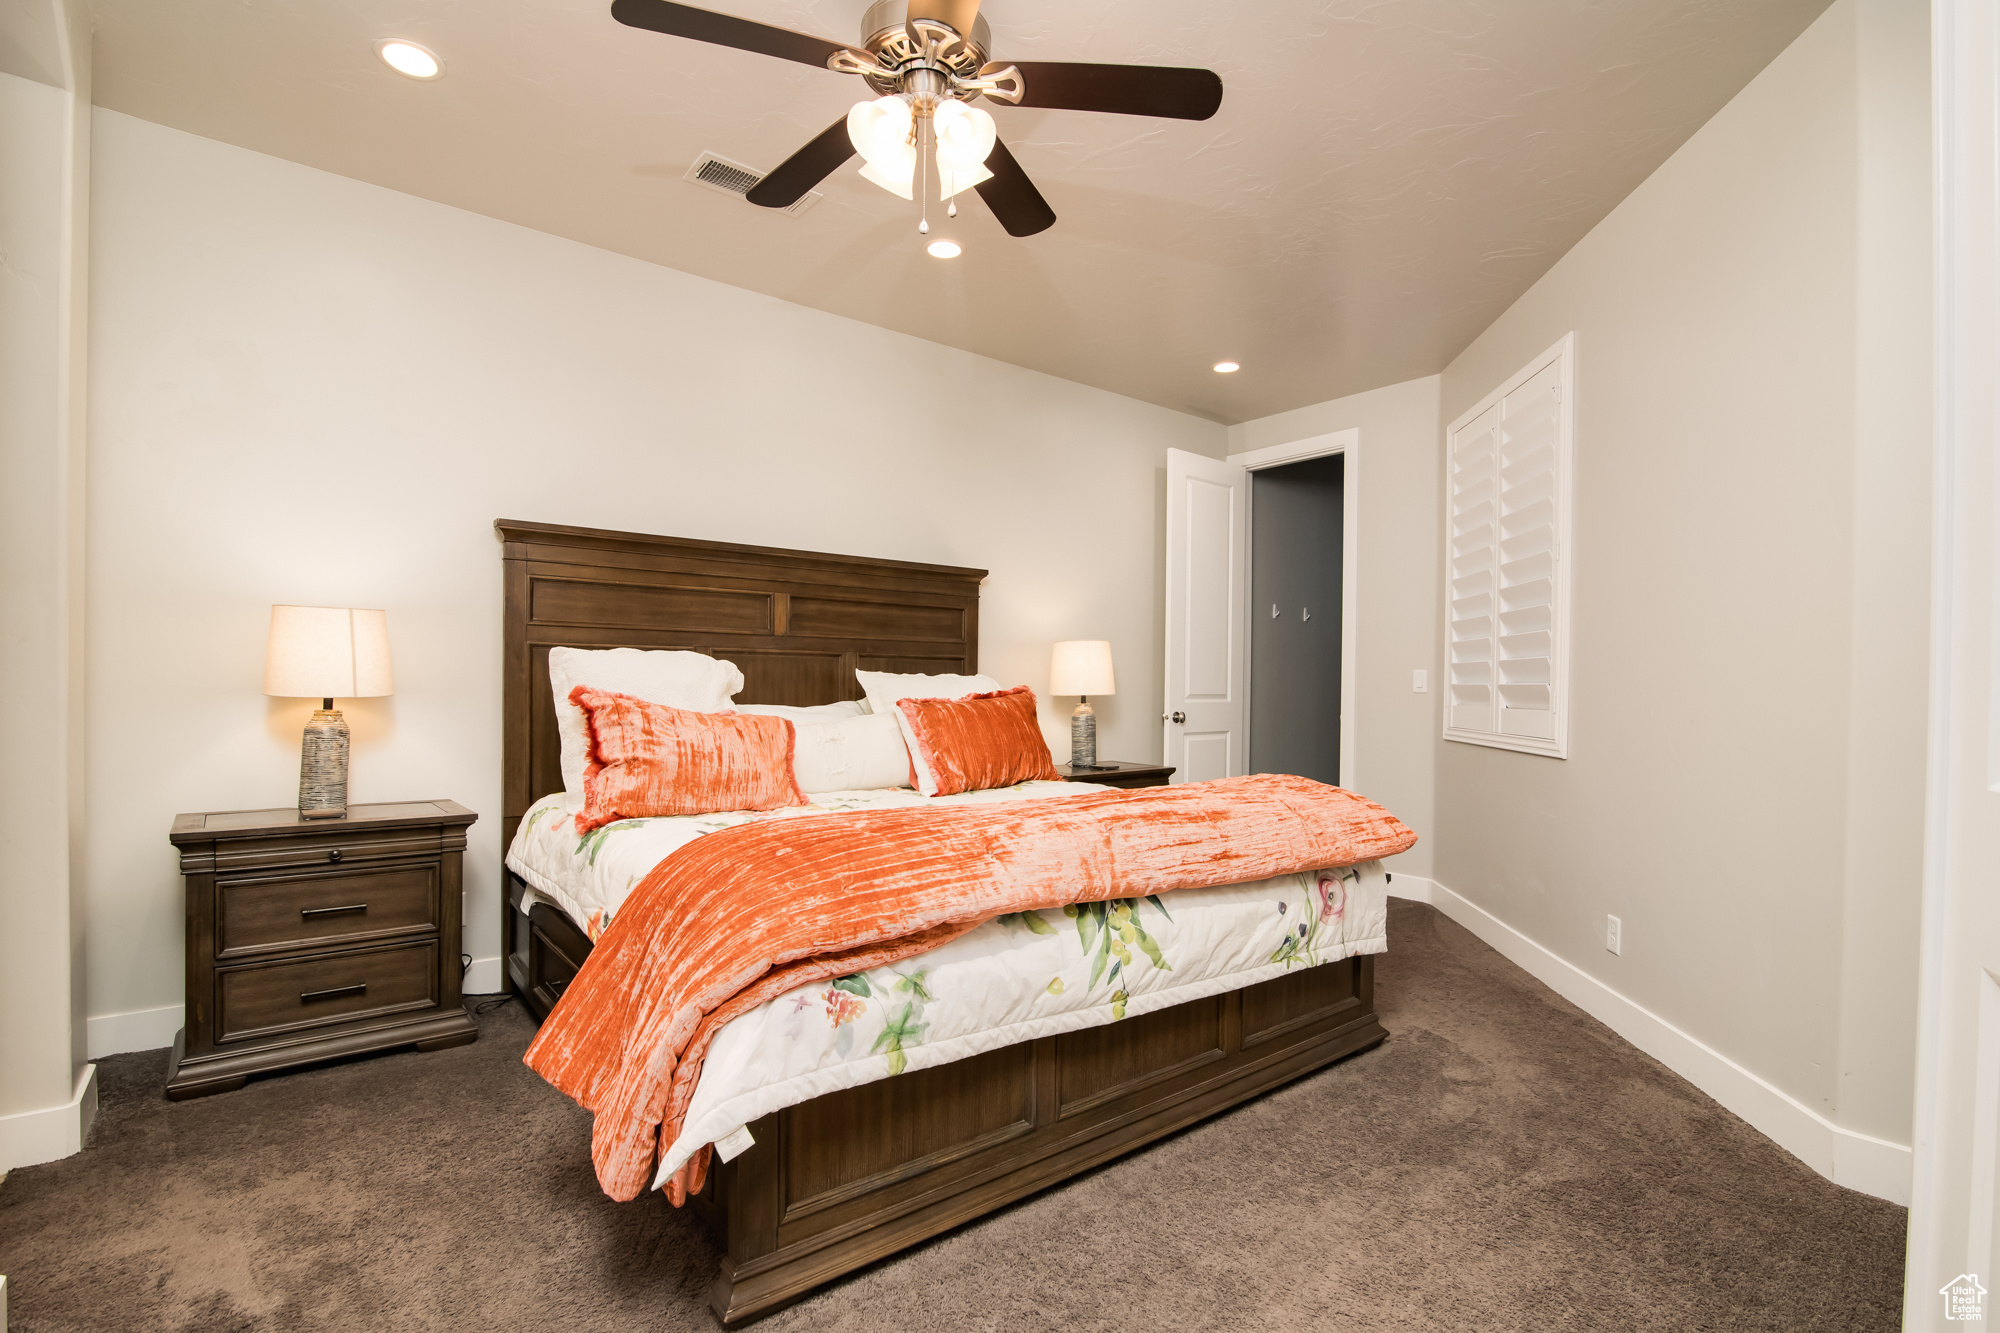 Carpeted bedroom with ceiling fan with ensuite bathroom